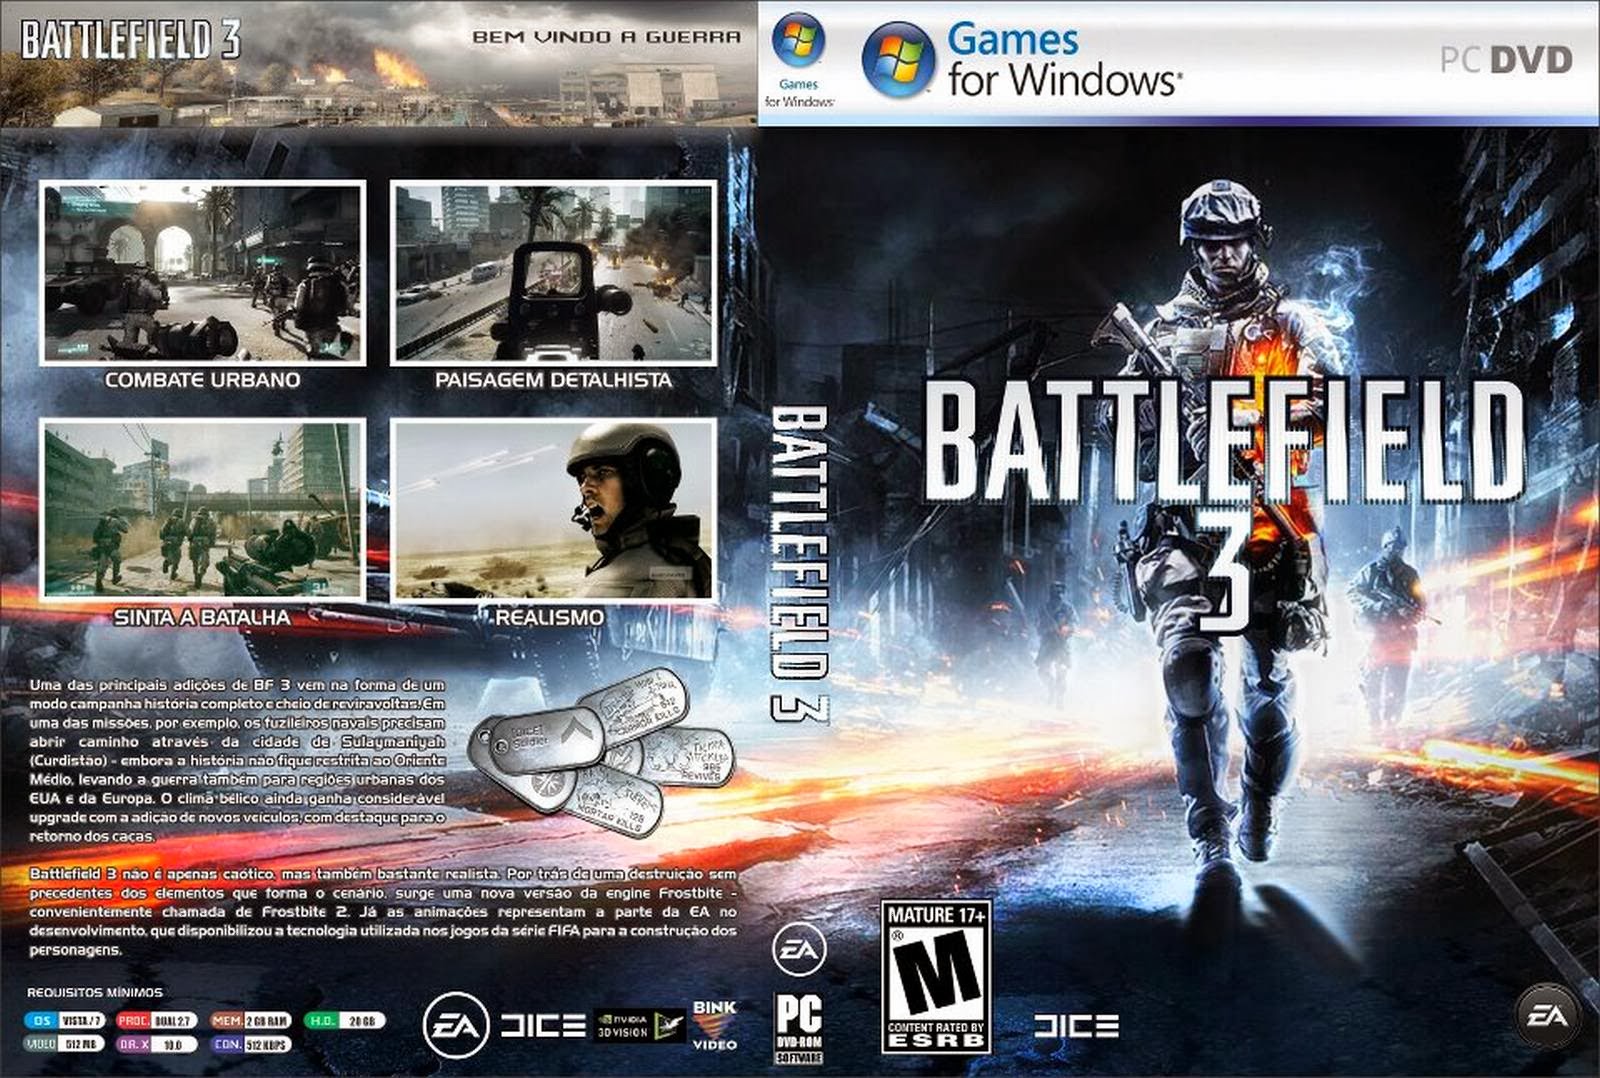 Games for a living. PC DVD Battlefield 3. Battlefield 3 PC диск. Battlefield 4 PC DVD. Bf 3 обложка.